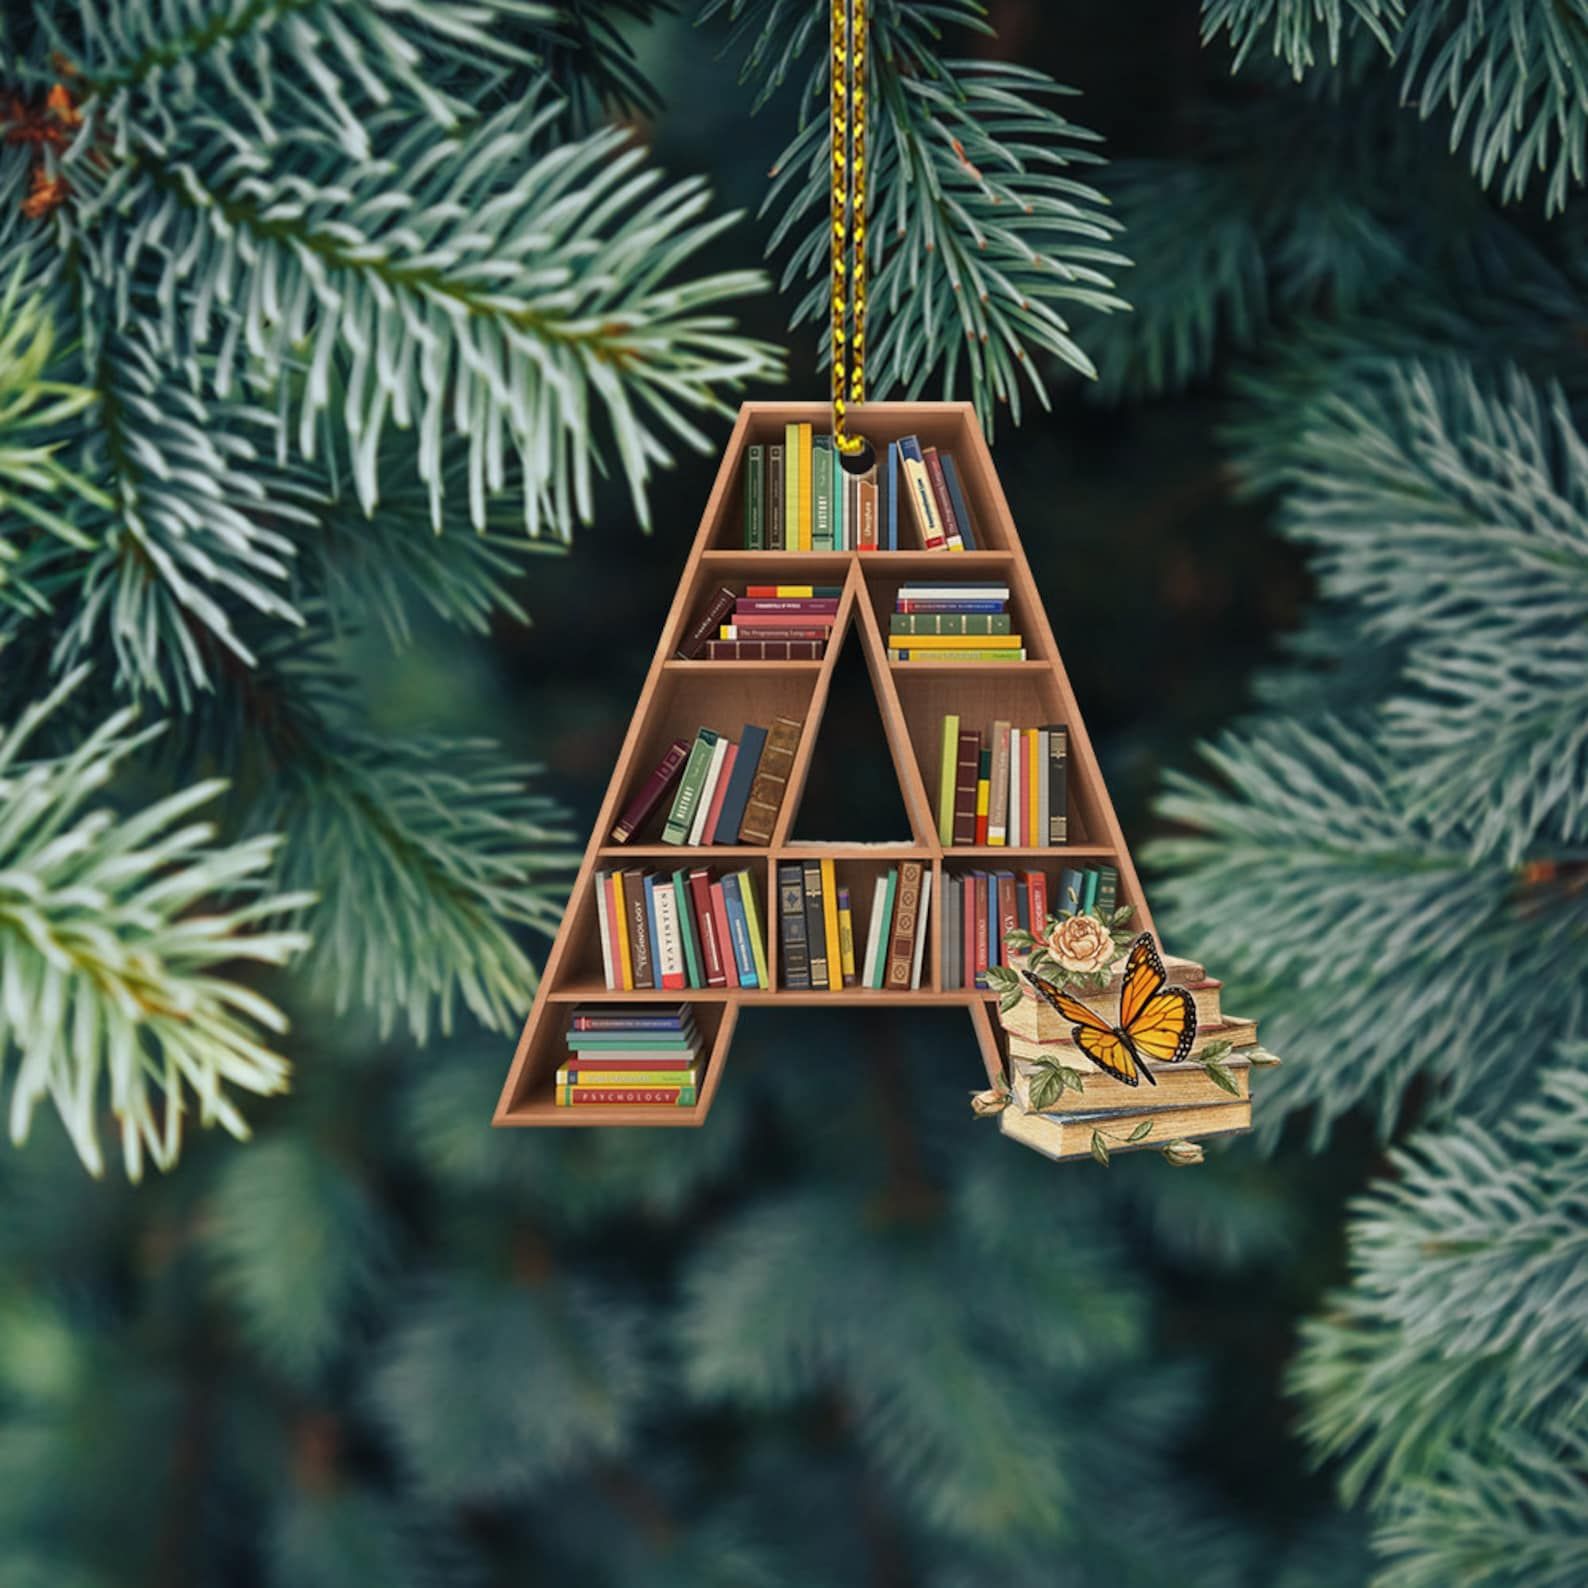 An ornament in the shape of an A with bookshelves and mini books